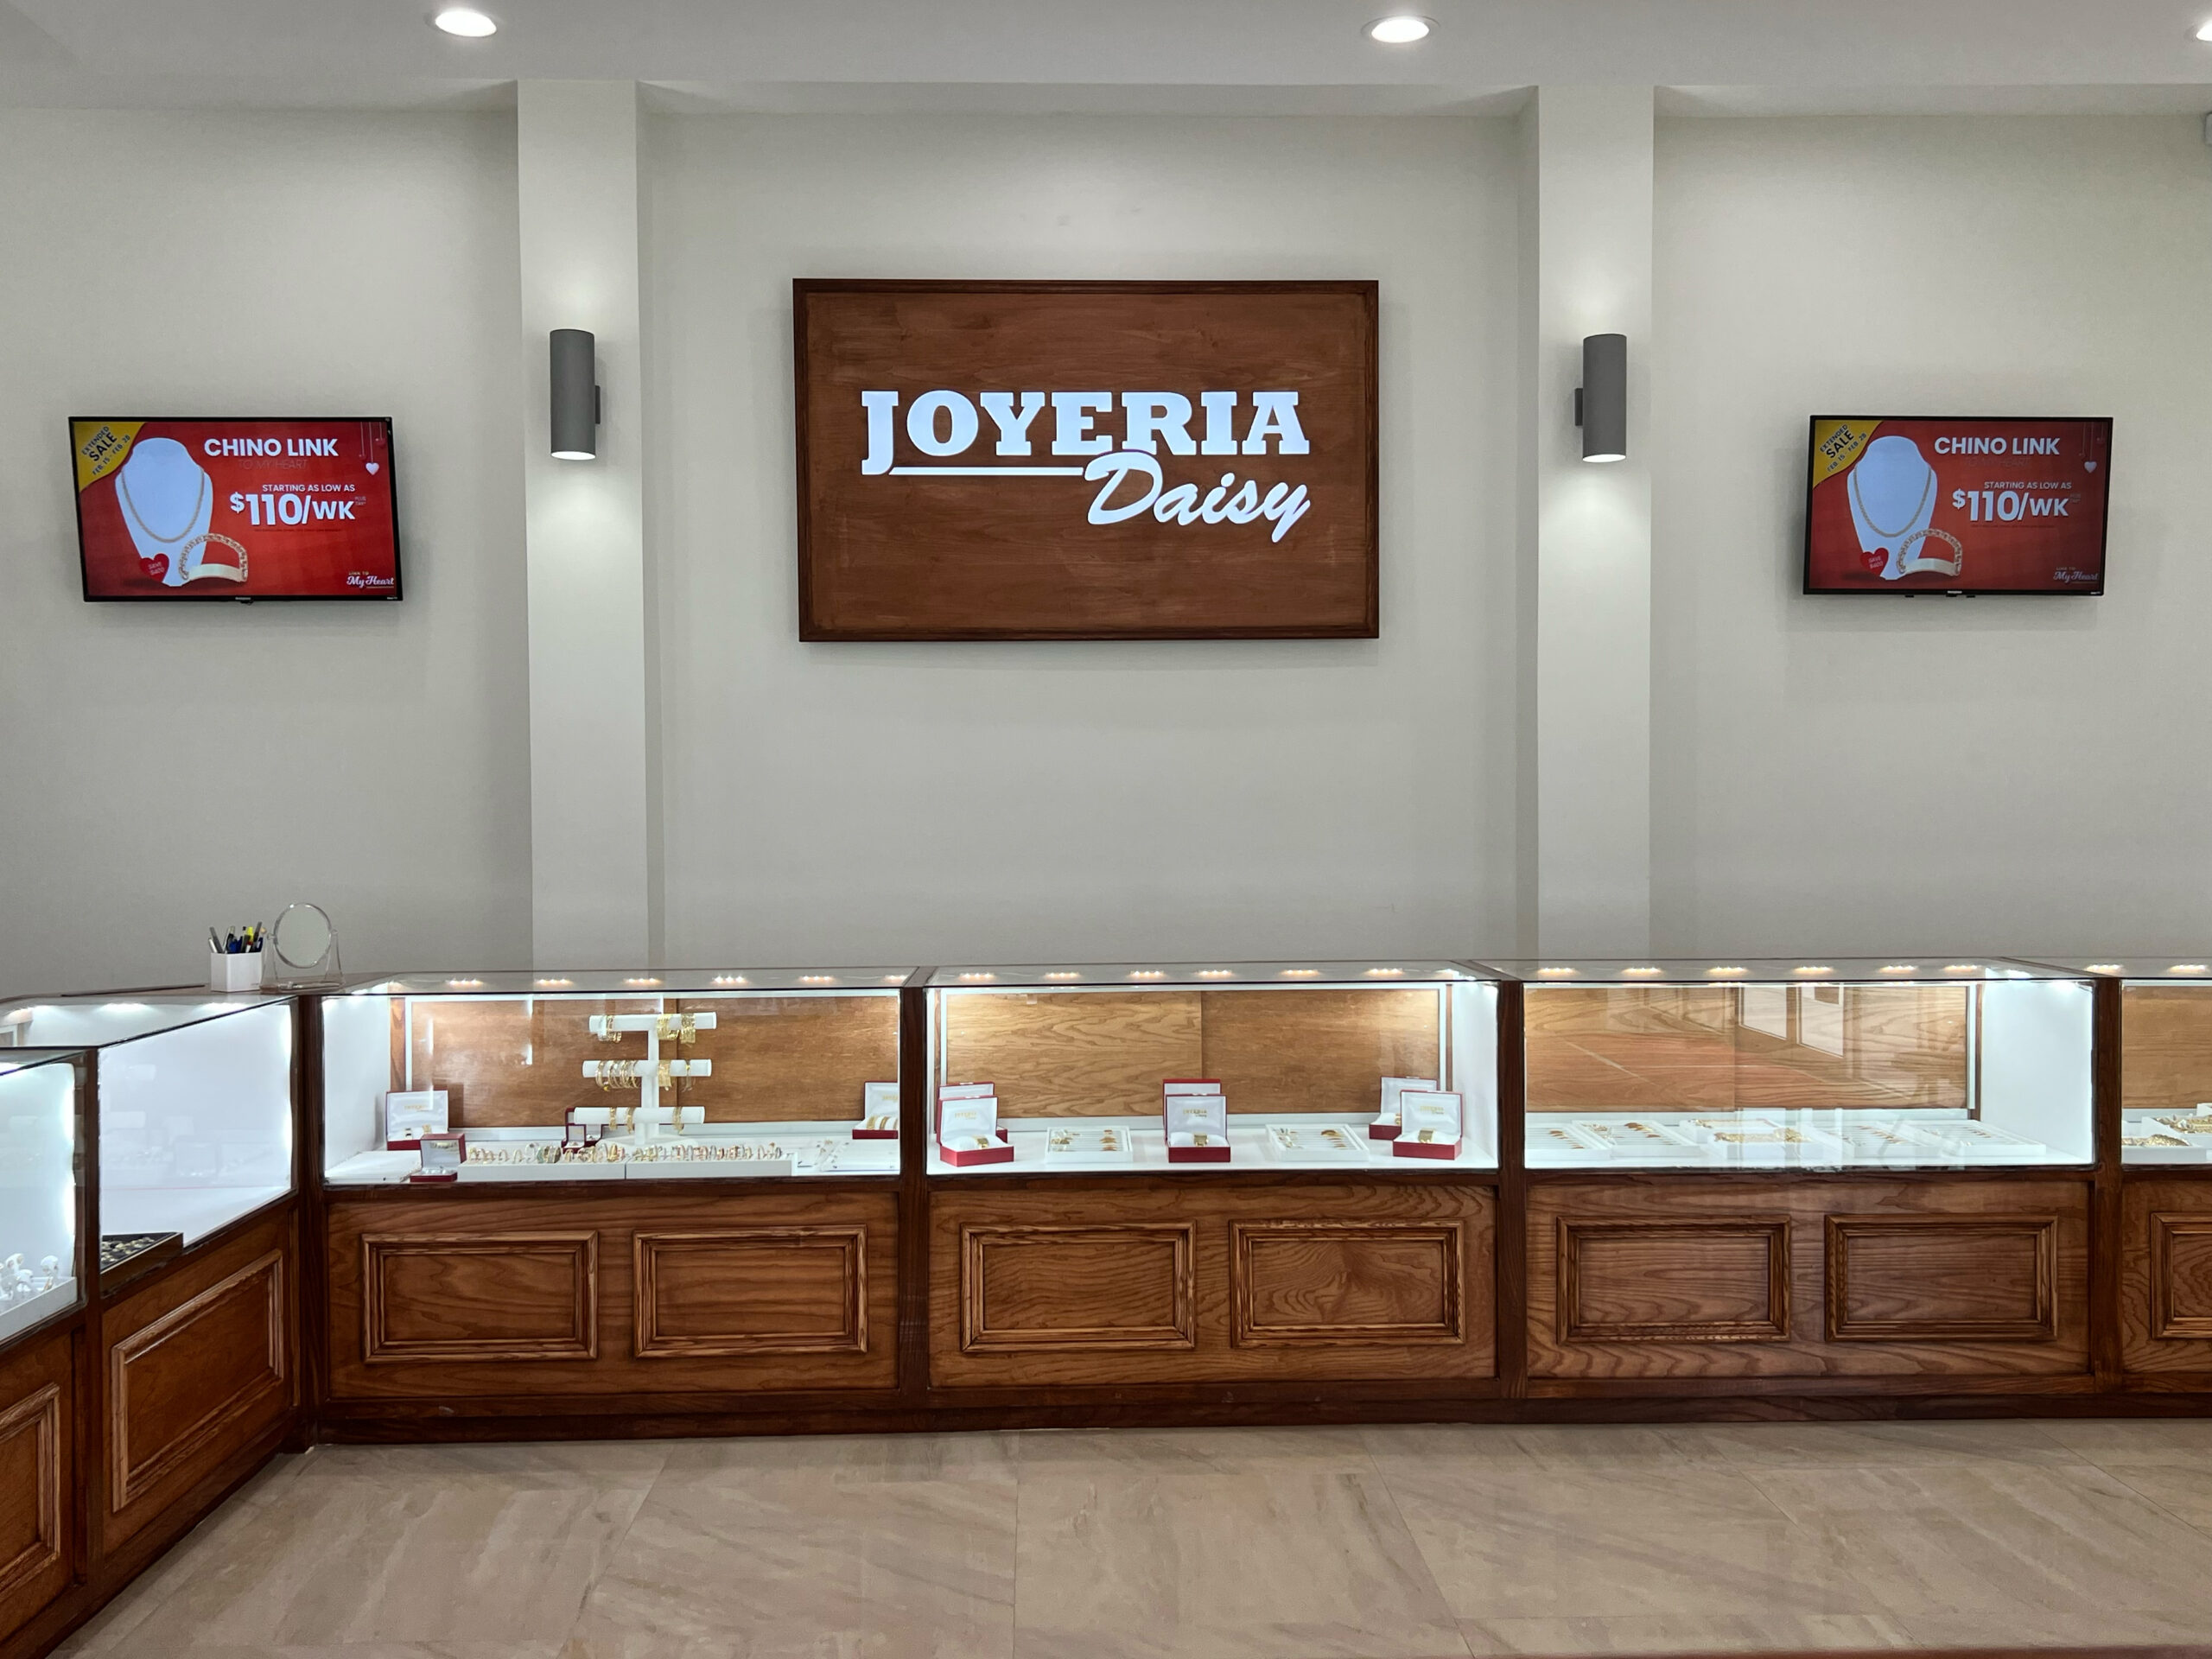 Interior for Joyeria Daisy, Family owned and operated jewelry store that specializes in gold jewelry.